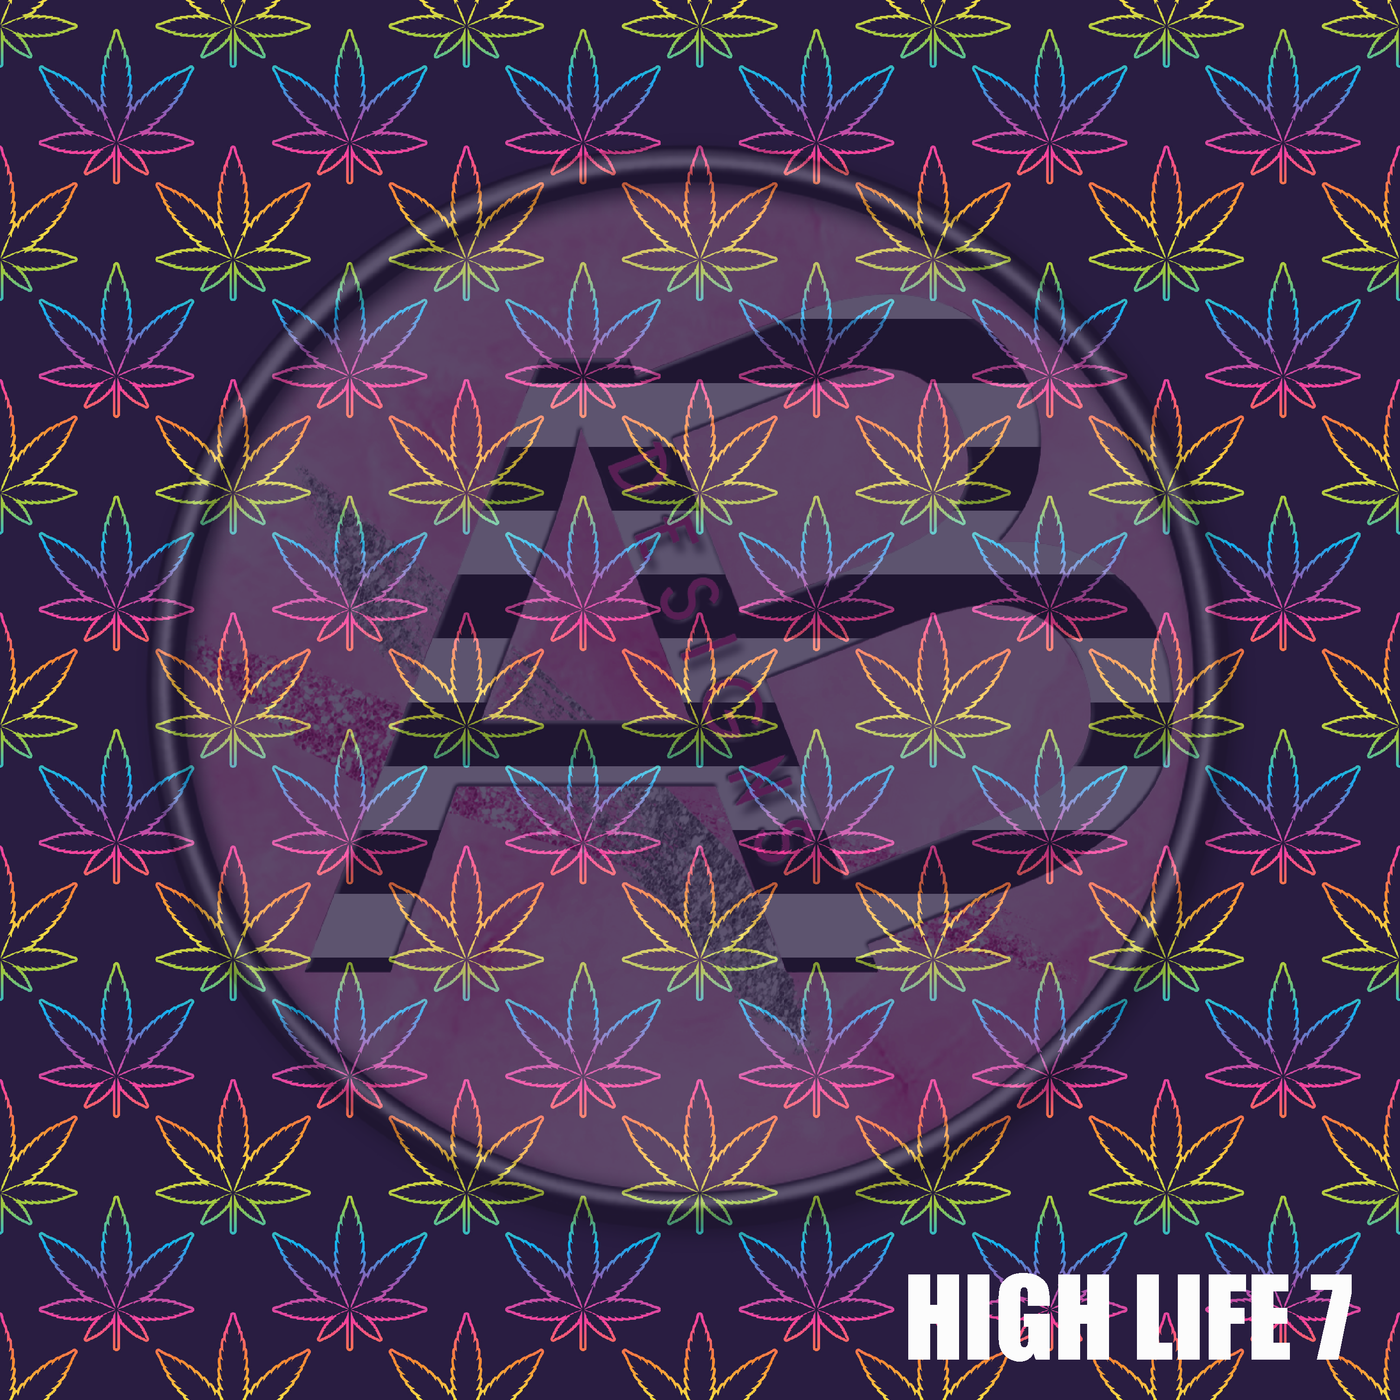 Adhesive Patterned Vinyl - High Life 7